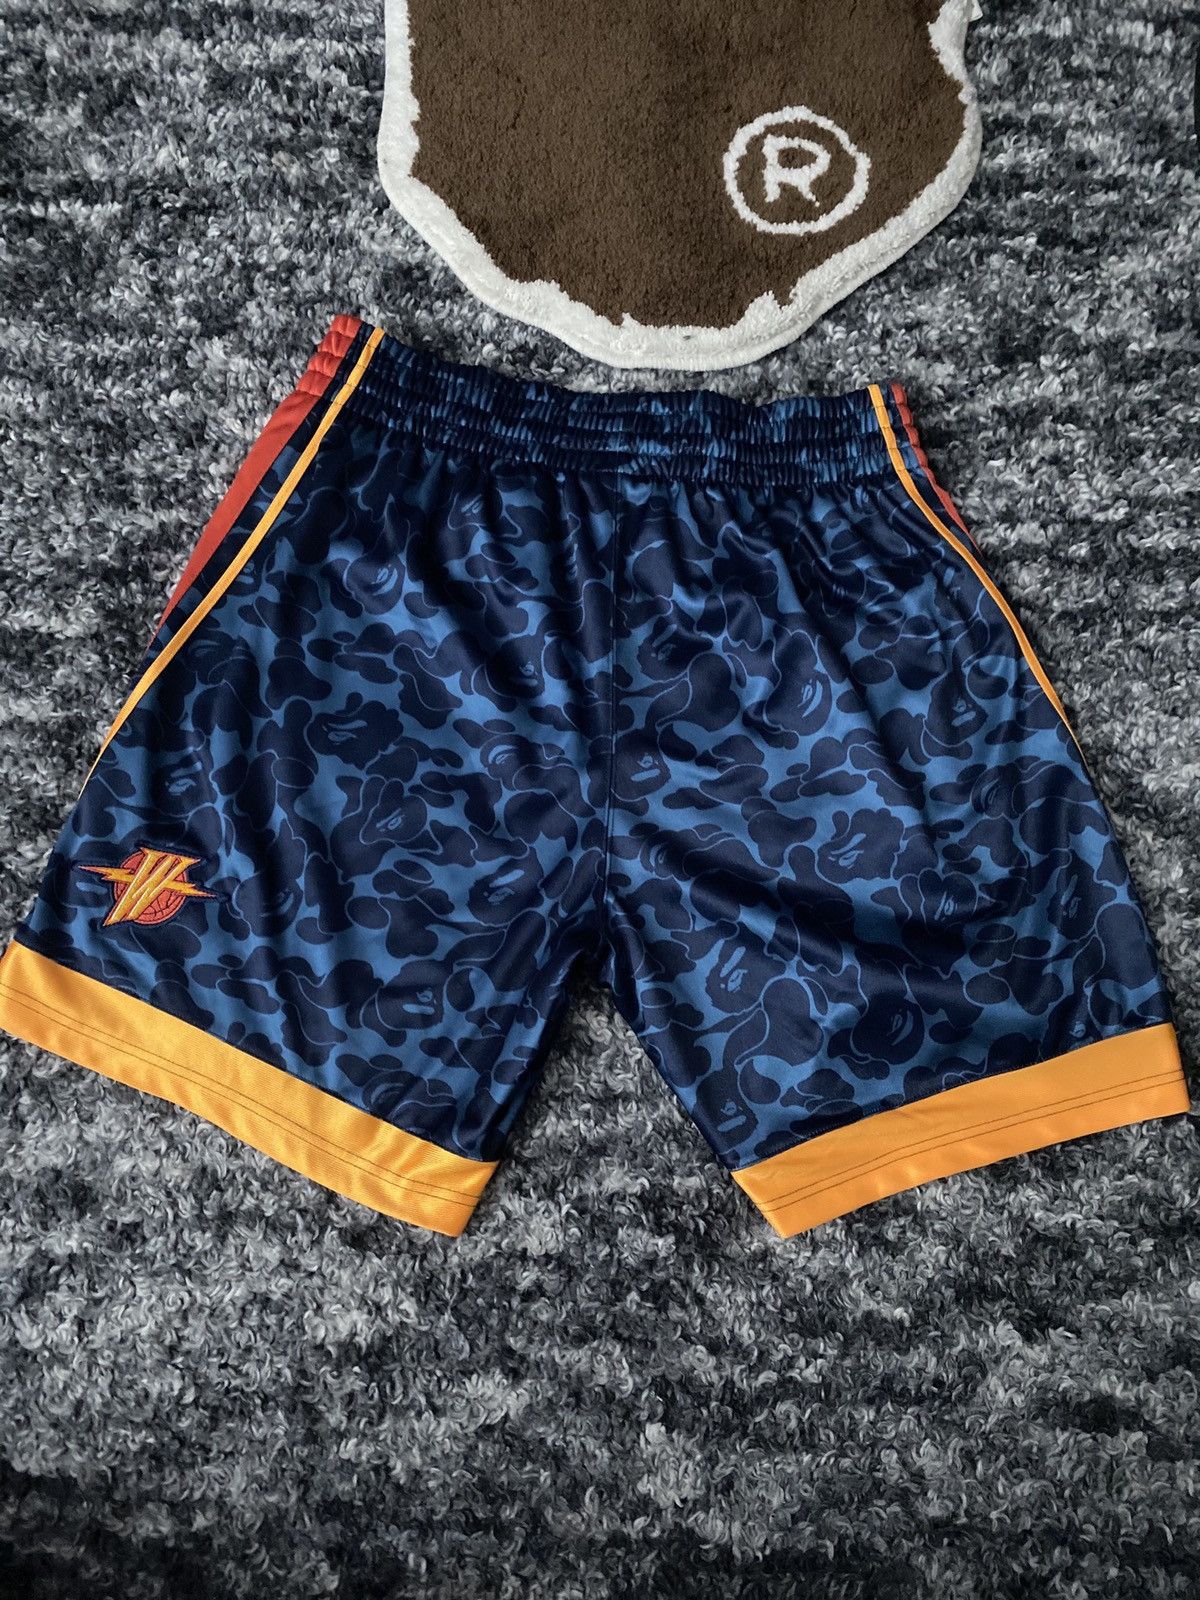 Bape Bape x Mitchell & Ness Warriors Authentic Basketball Shorts Size US 35 - 2 Preview